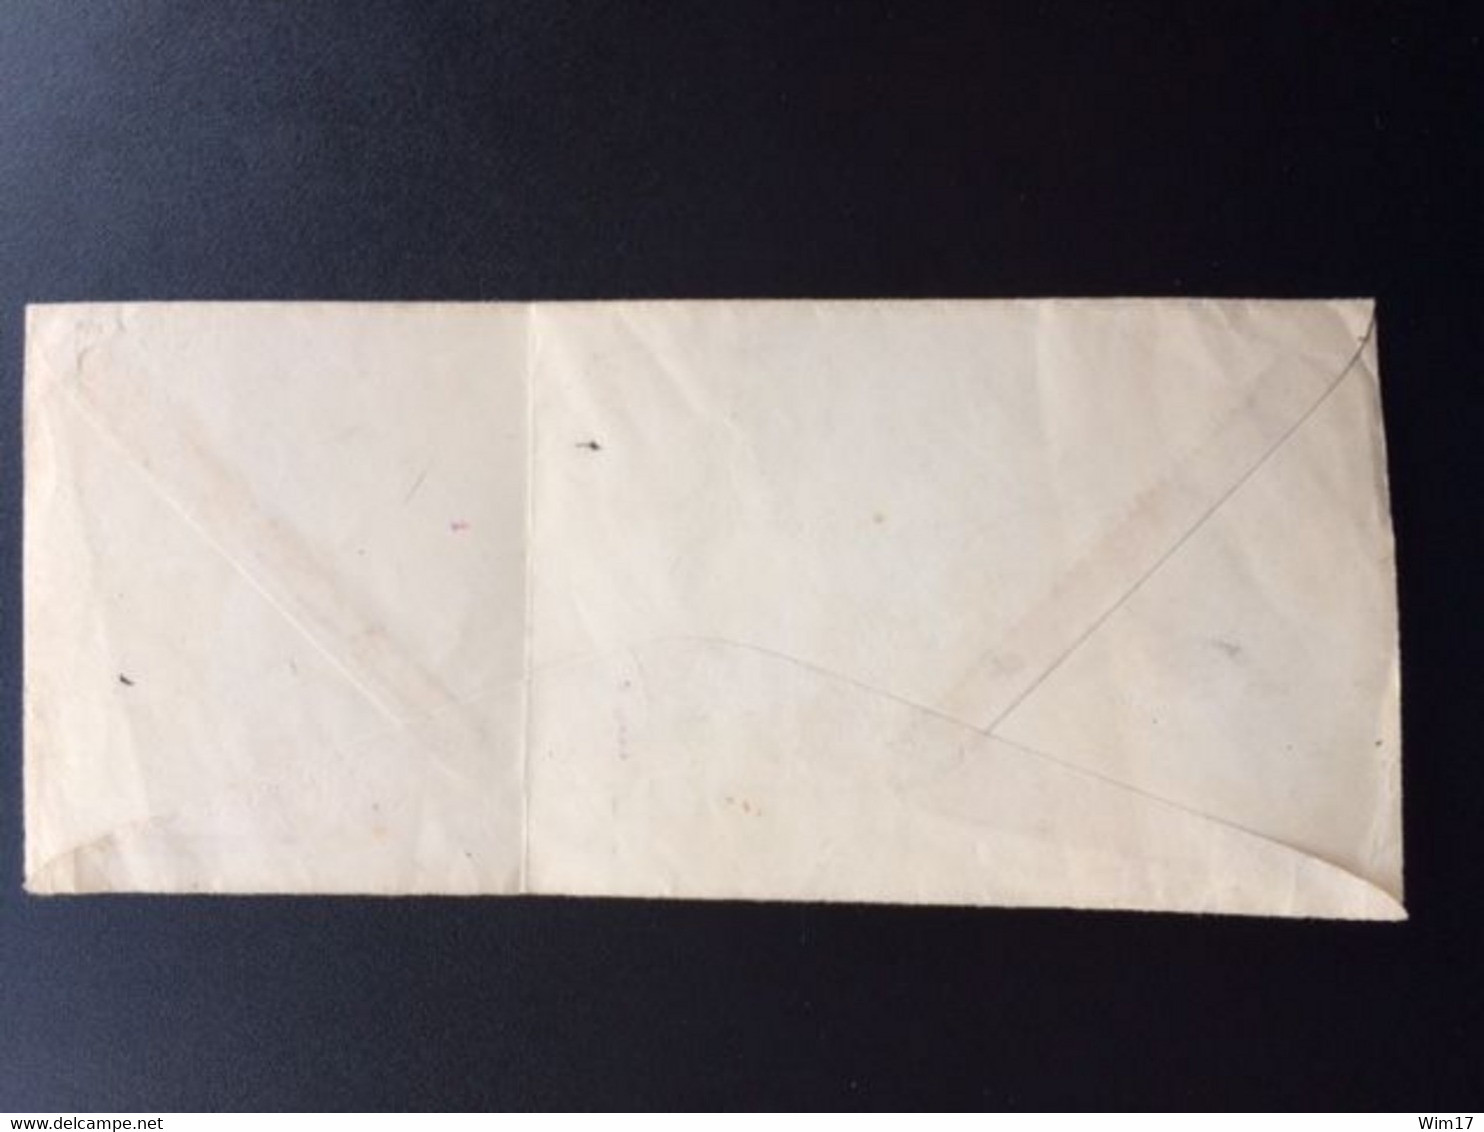 USA 1935 LETTER WITH MINISHEET (COVER IS FOLDED) VERENIGDE STATEN UNITED STATES OF AMERICA - 1921-40